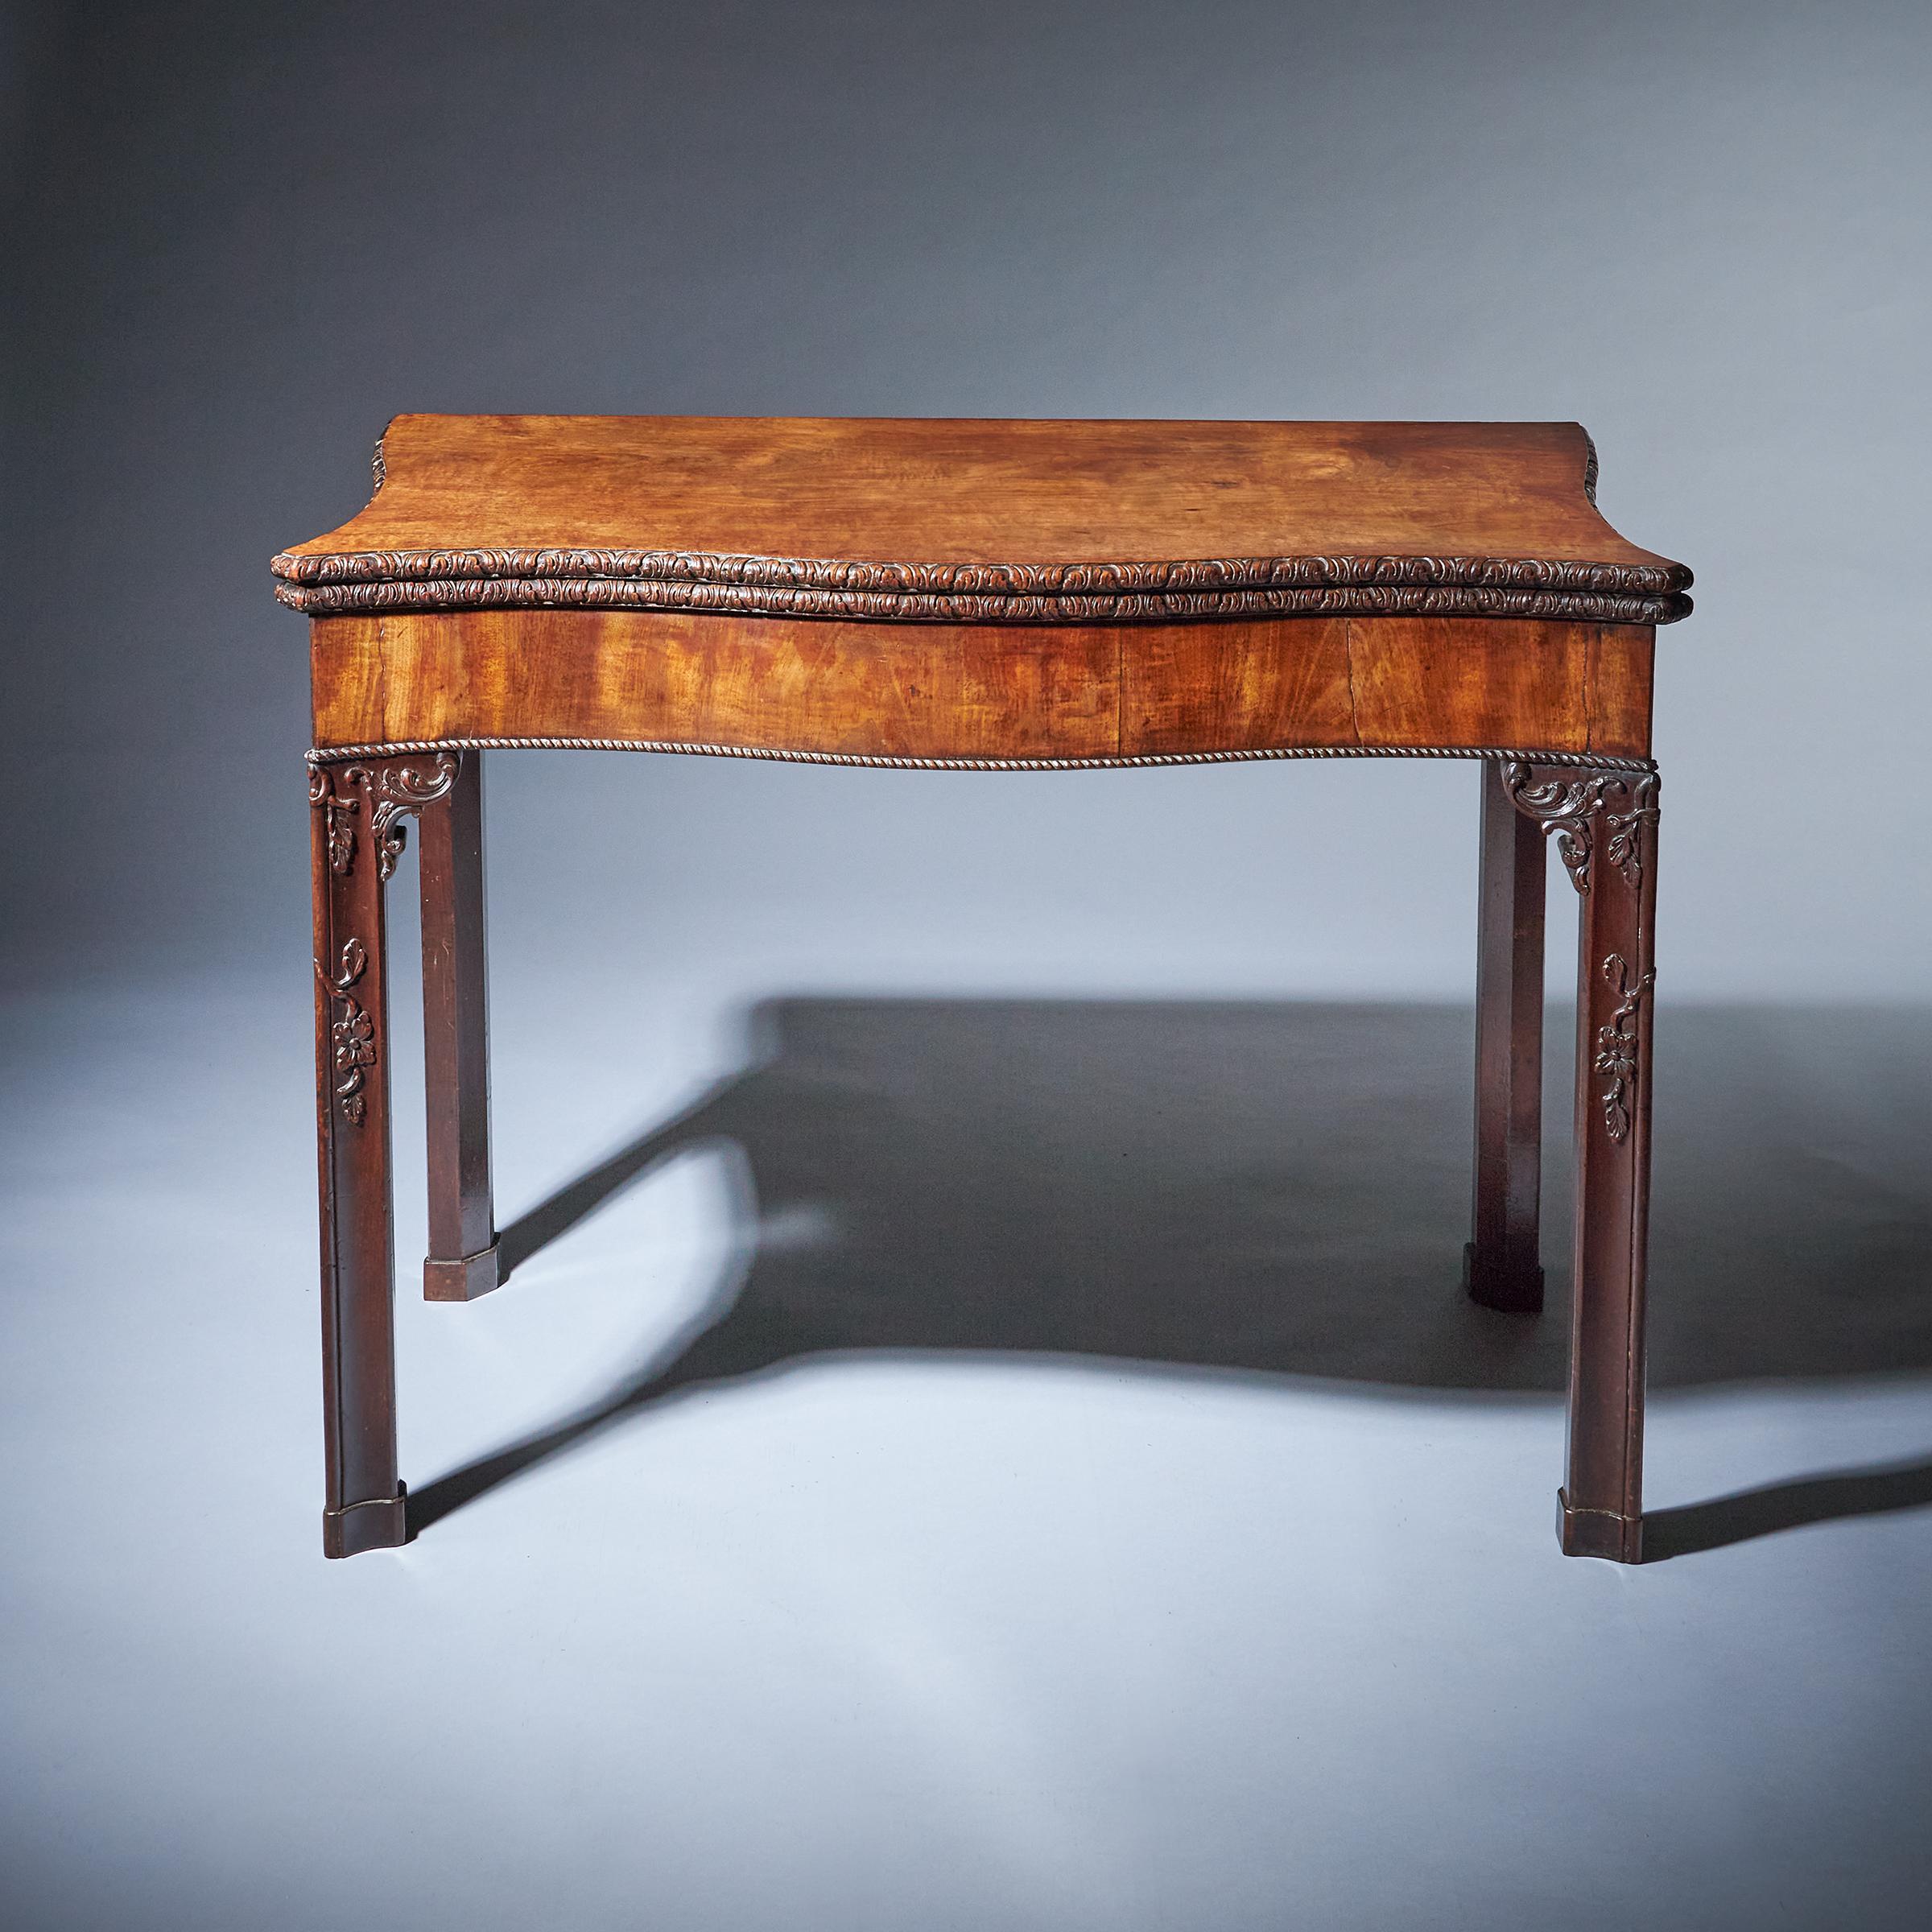 A bold and impressive George III carved mahogany serpentine concertina action card table, circa 1760. 

In the manner of William Vile & John Cobb, St Martin's Lane, London

William Vile was one of the foremost cabinetmakers of mid-18th century